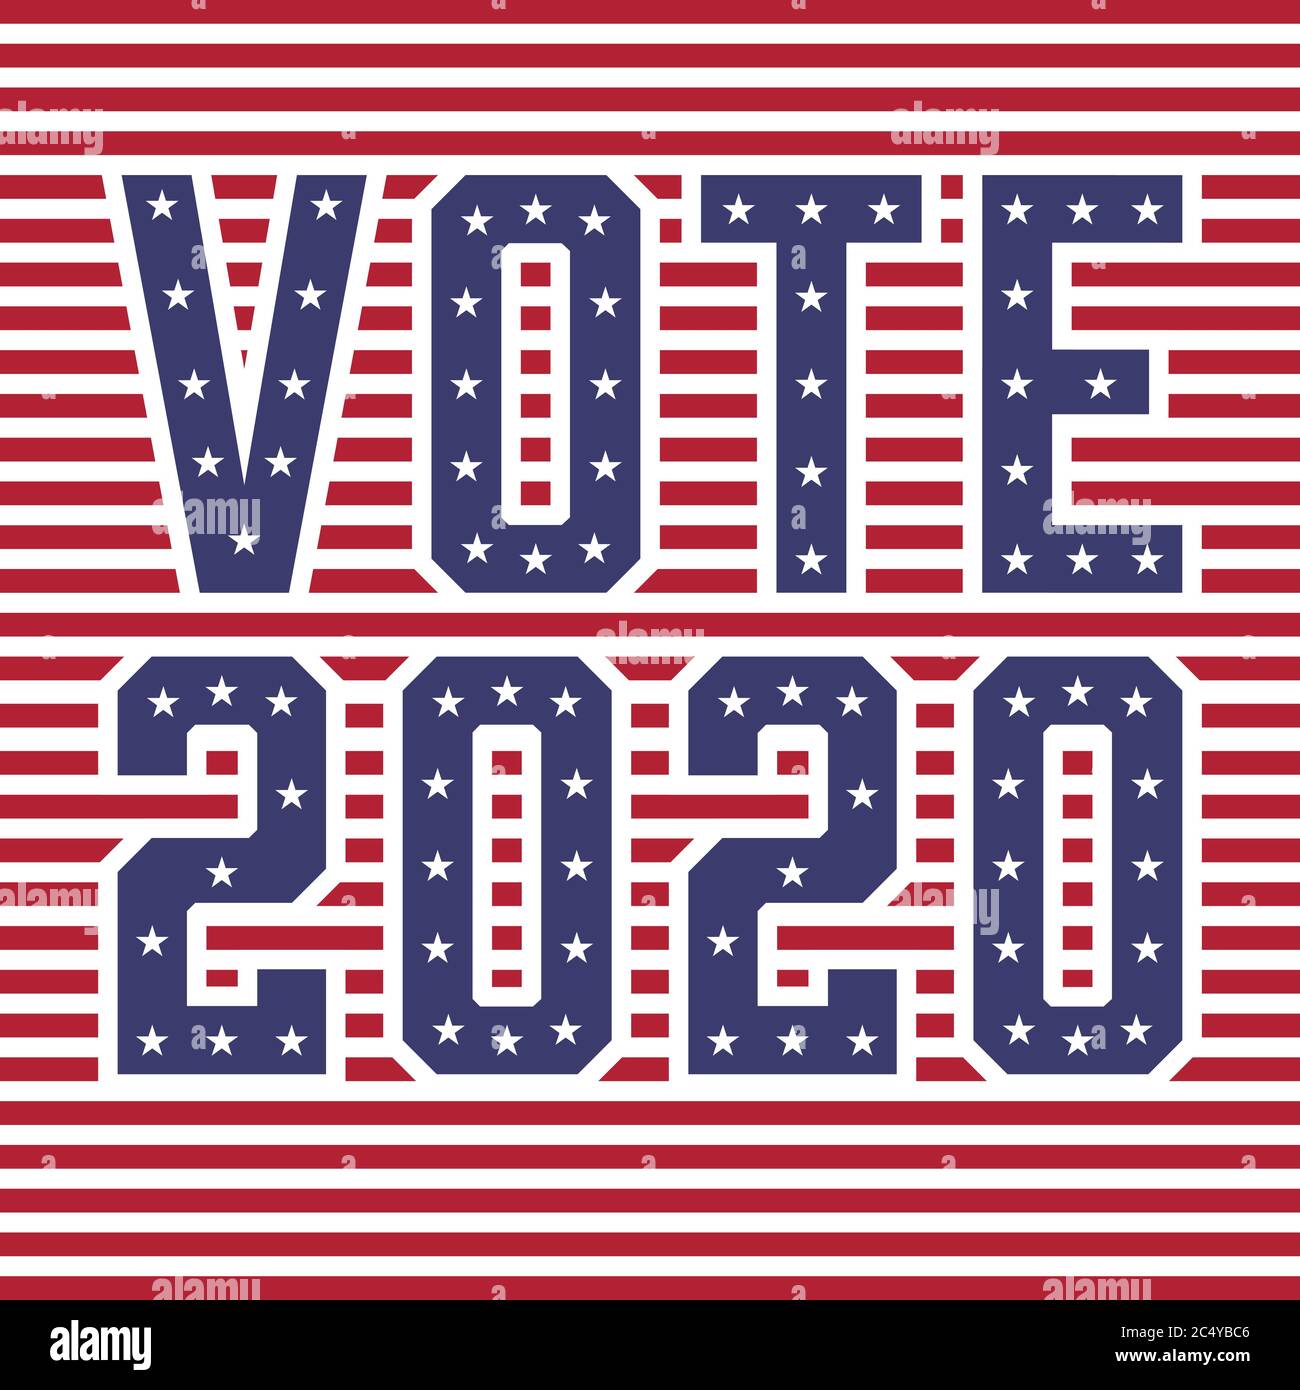 United States of America (USA) Elections VOTE 2020 with Stars and Stripes Concept Vector Illustration Stock Vector